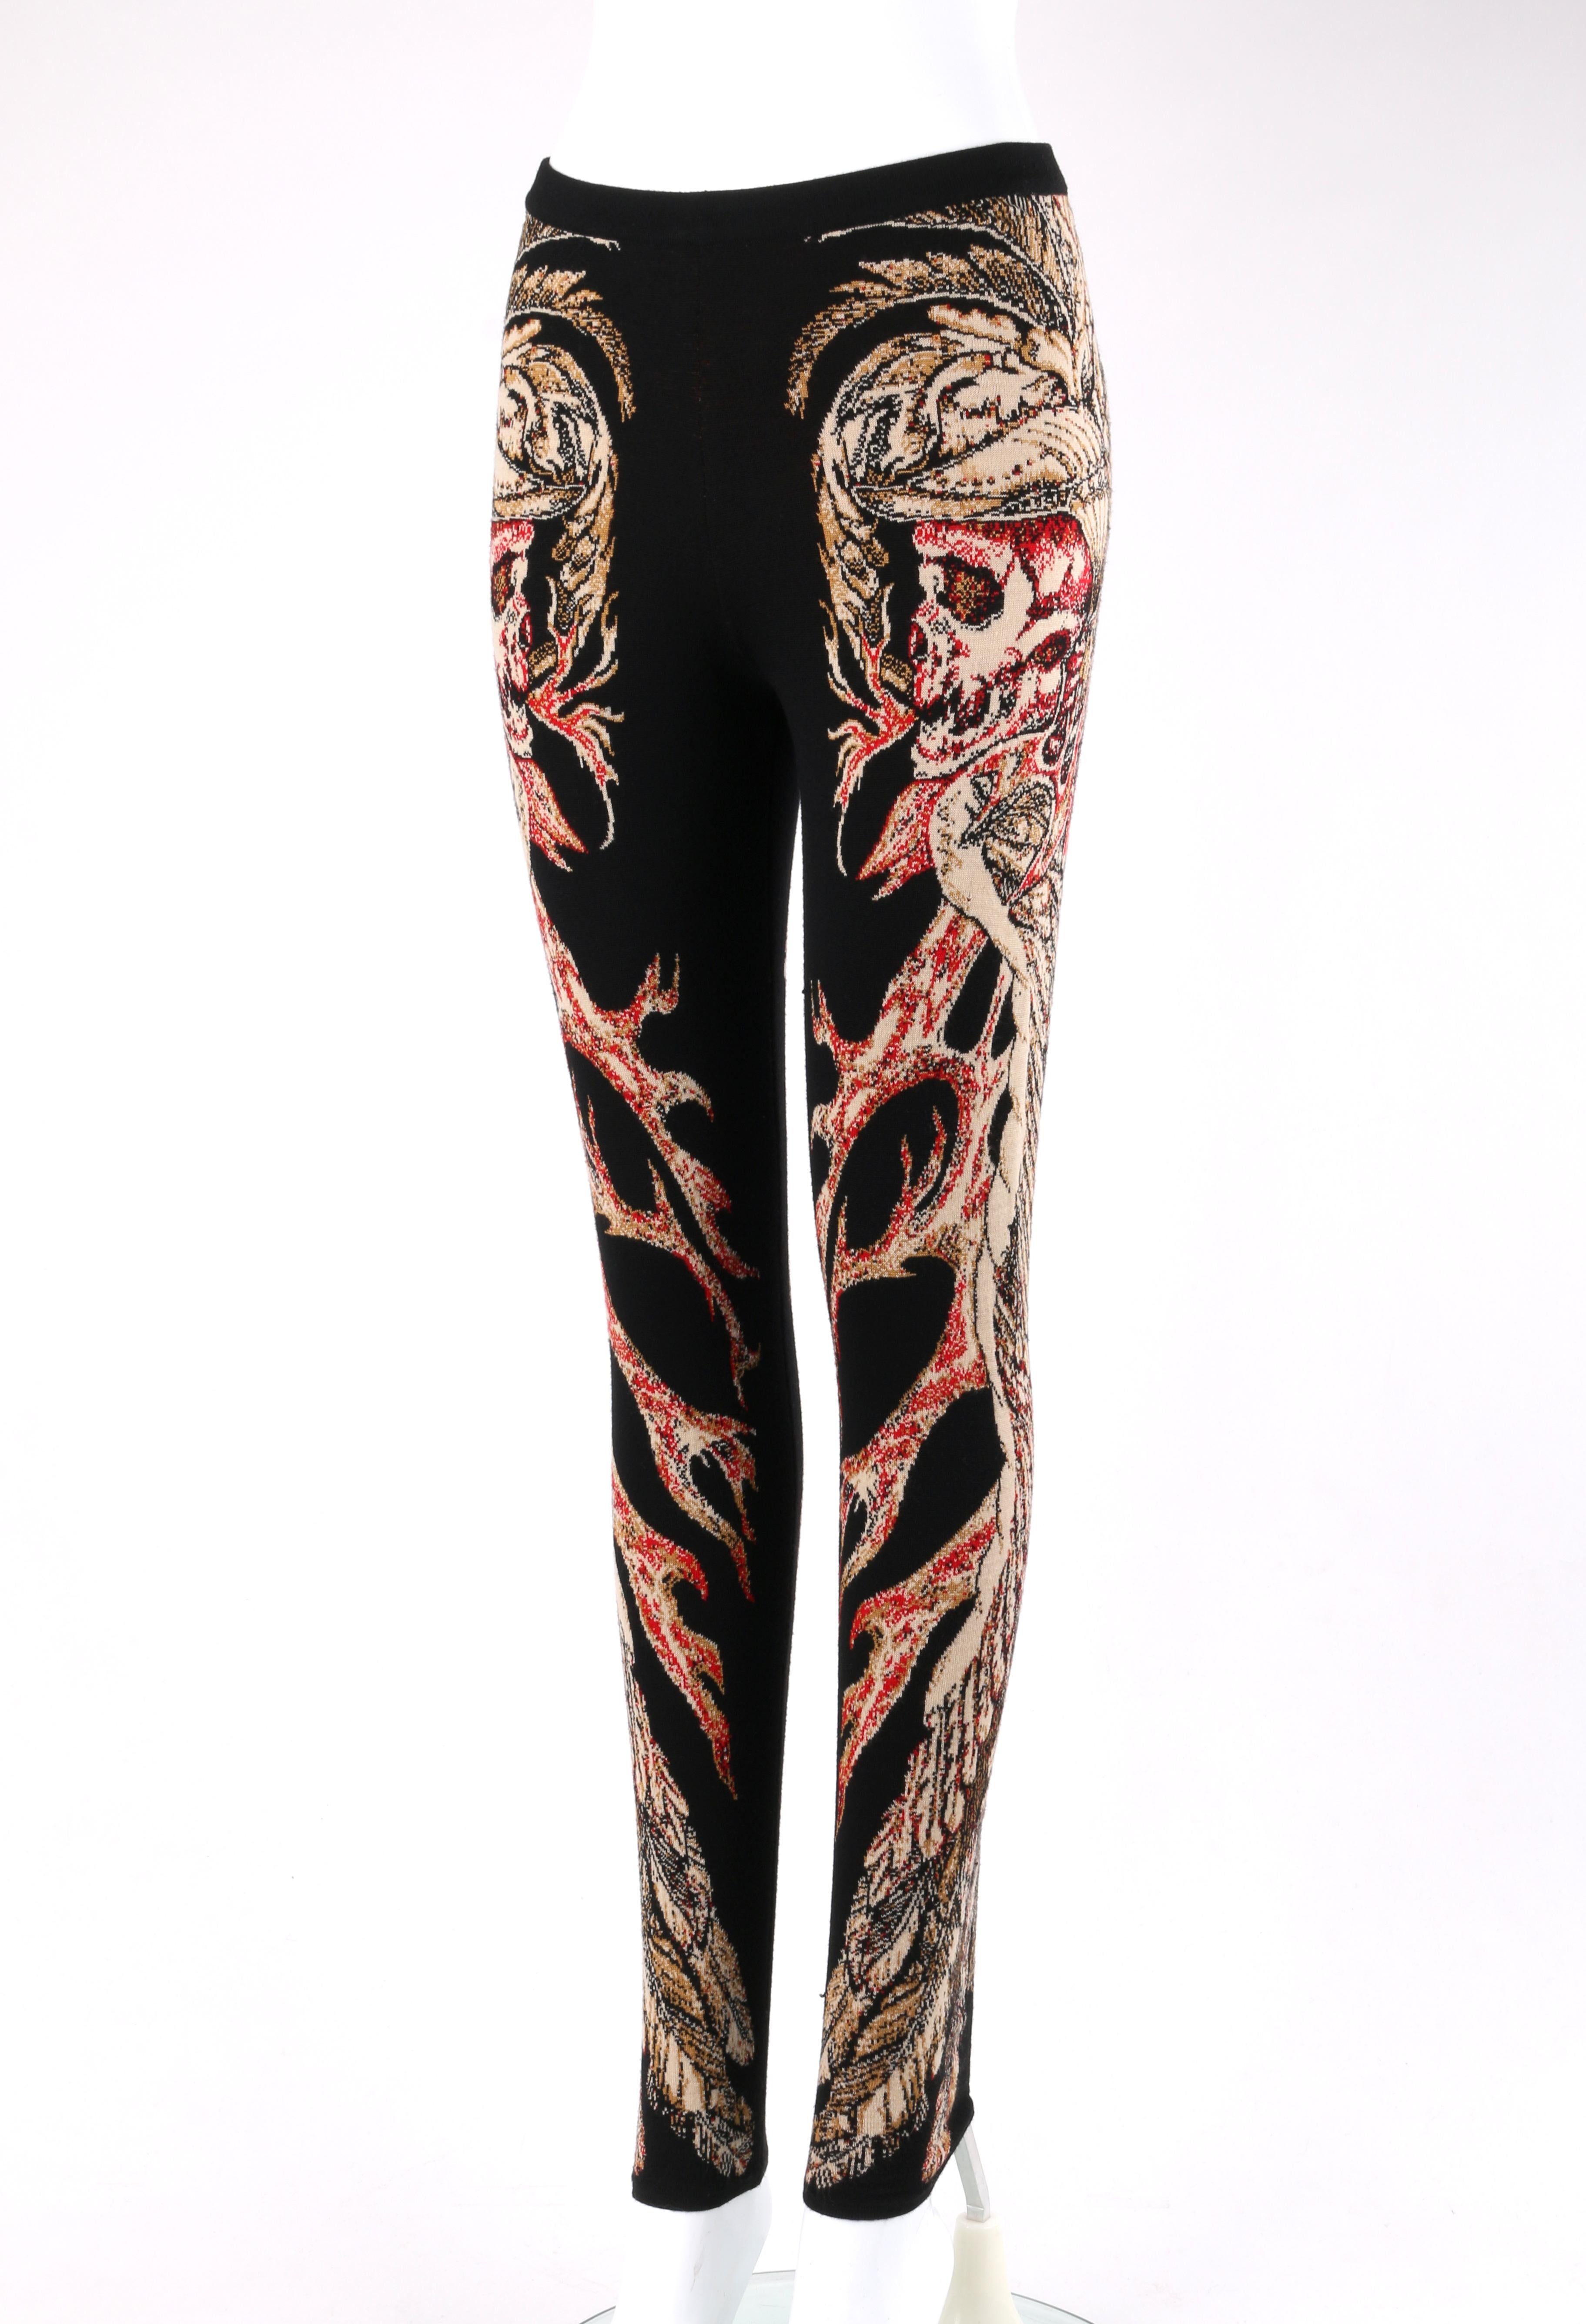 ALEXANDER McQUEEN A/W 2010 “Angels & Demons” “Hells Angels” Leggings RARE In Good Condition For Sale In Thiensville, WI